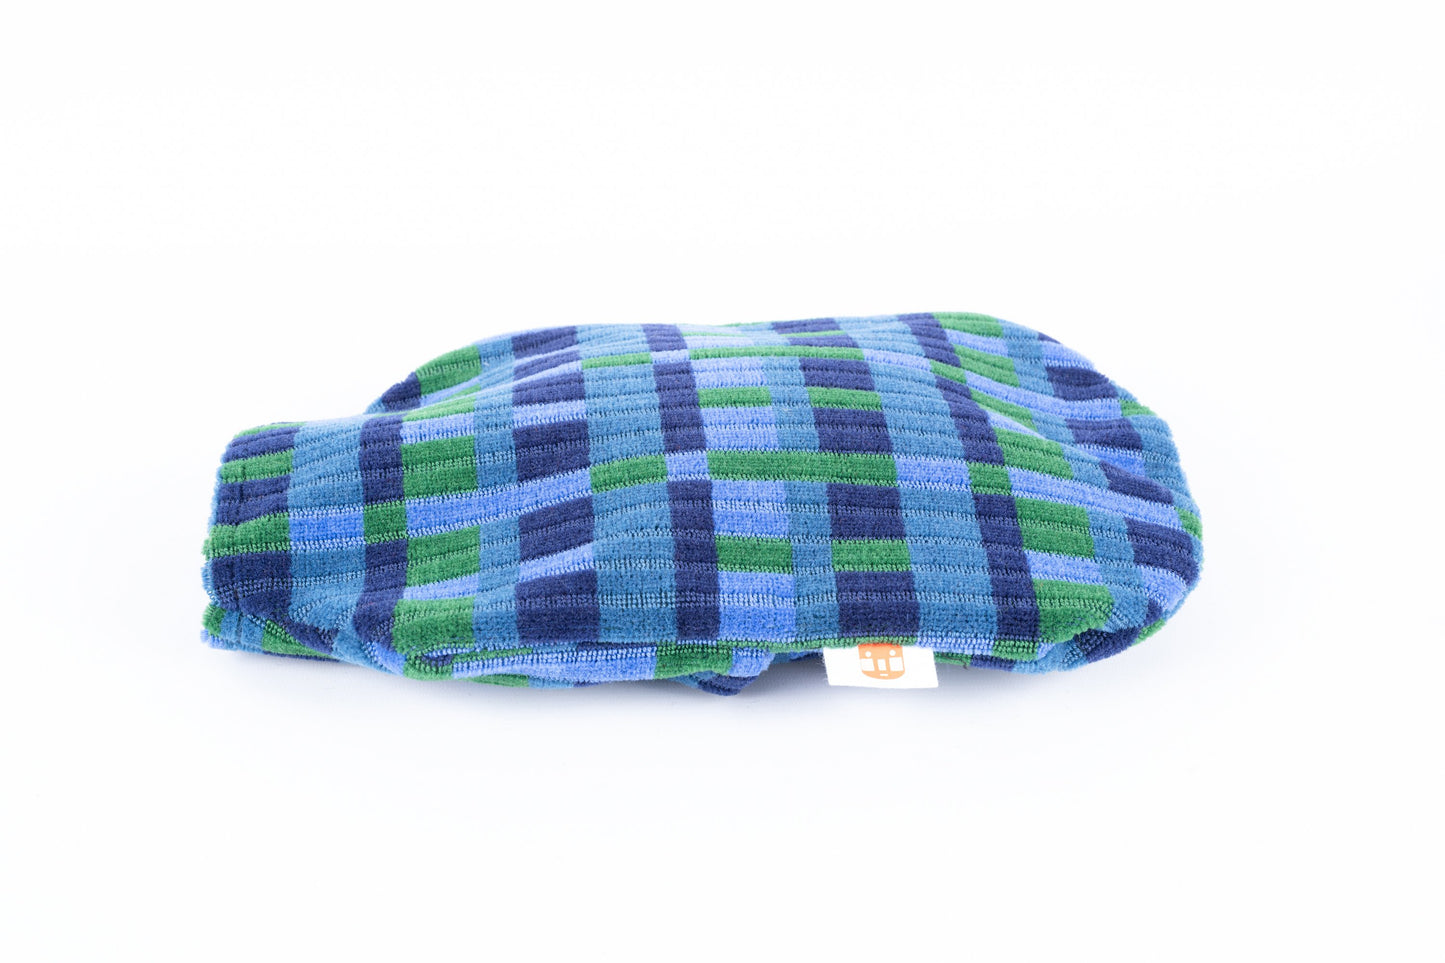 London Underground and London Bus  Victoria Line, Blue Straub Moquette Hot Water Bottle Cover